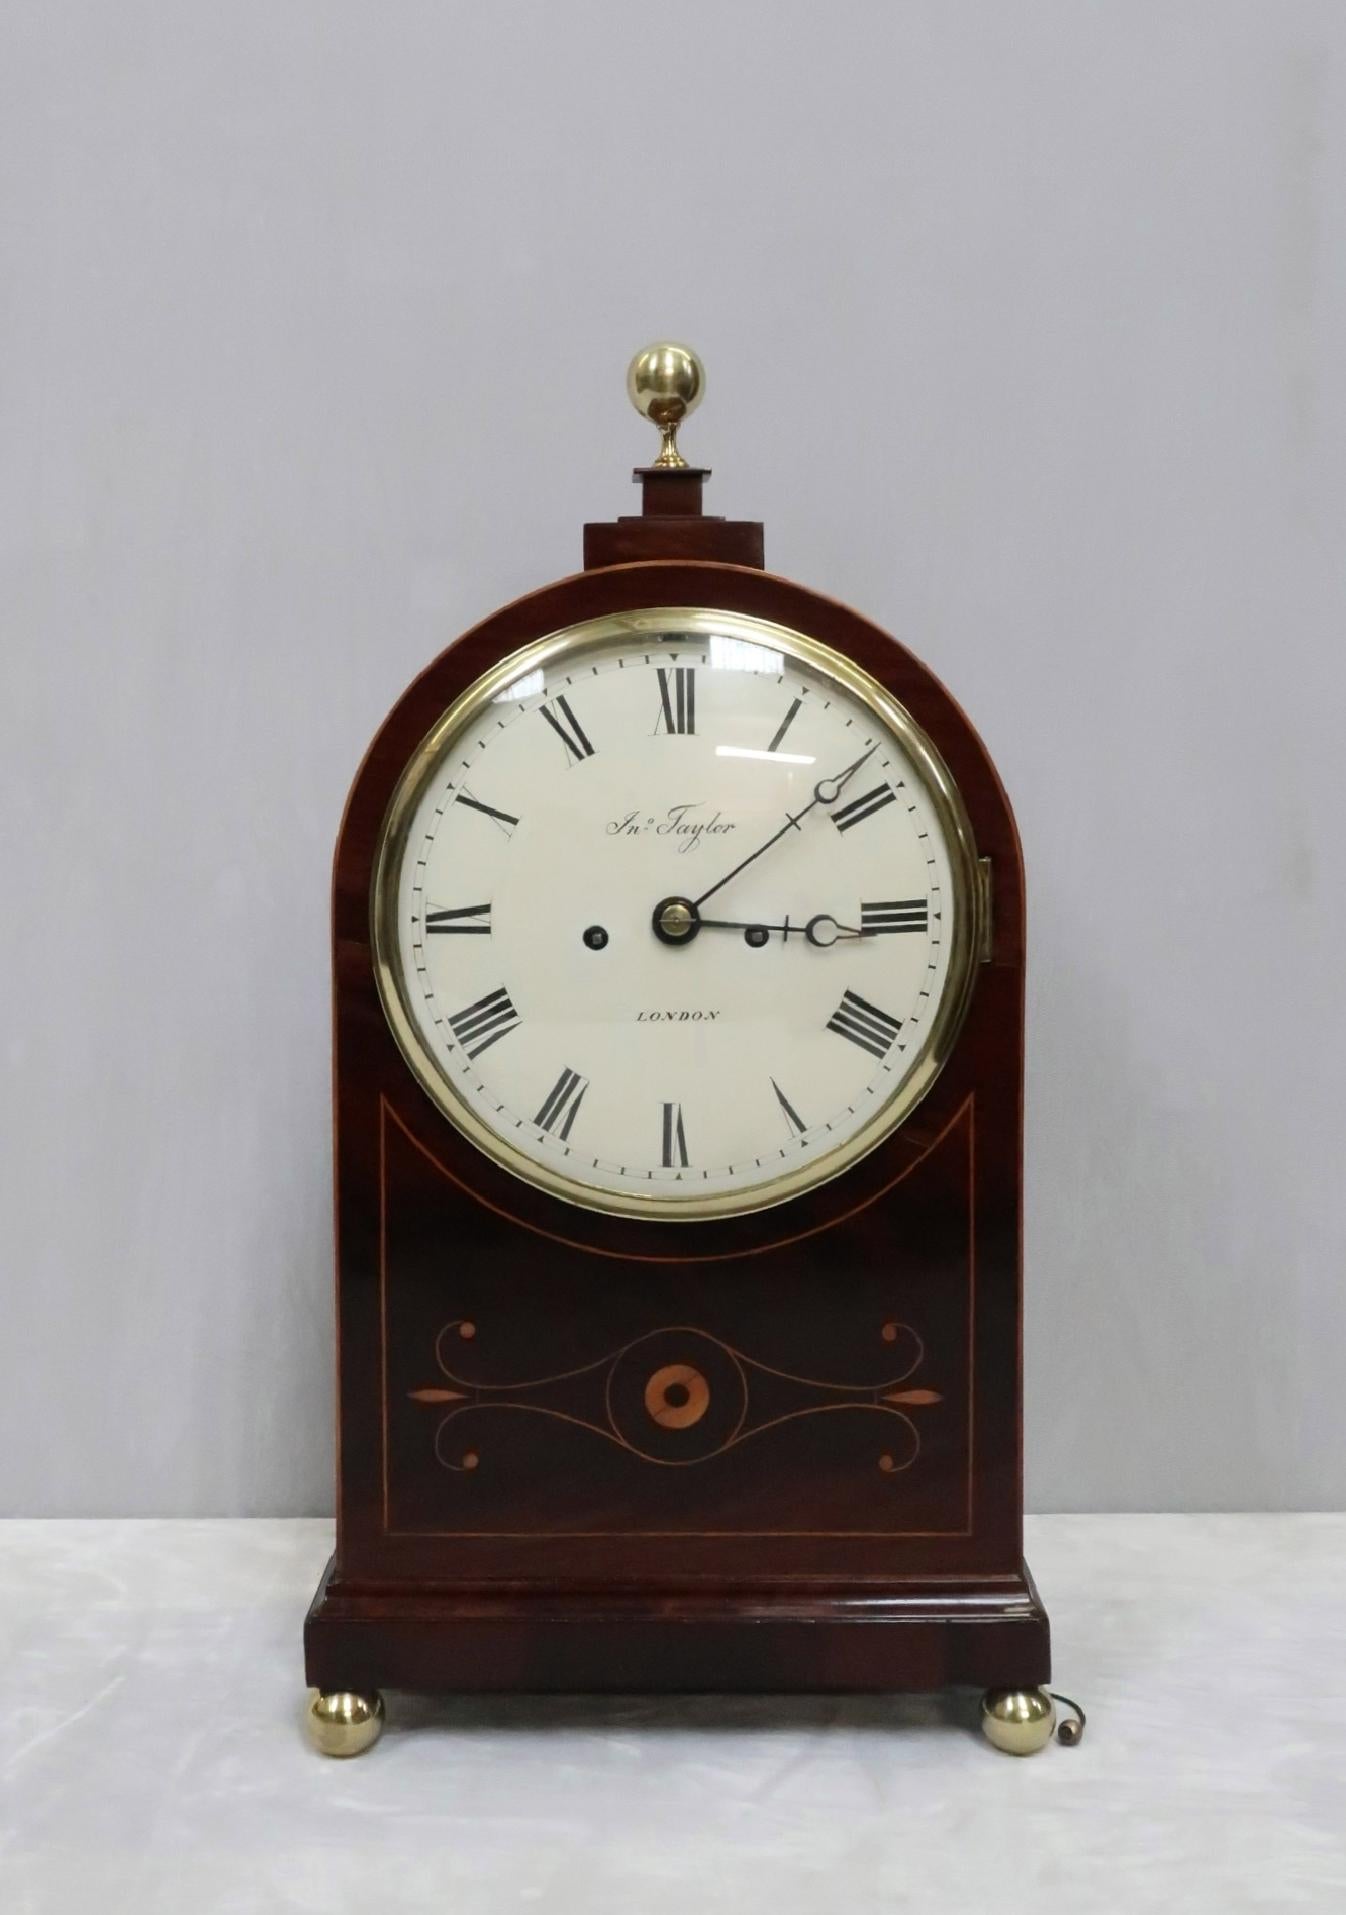 An extremely fine quality arched top mahogany English bracket or table clock with figured mahogany and boxwood string inlay to the front of the case and brass fish scale side sound frets.

The clock has an eight inch painted dish dial with the